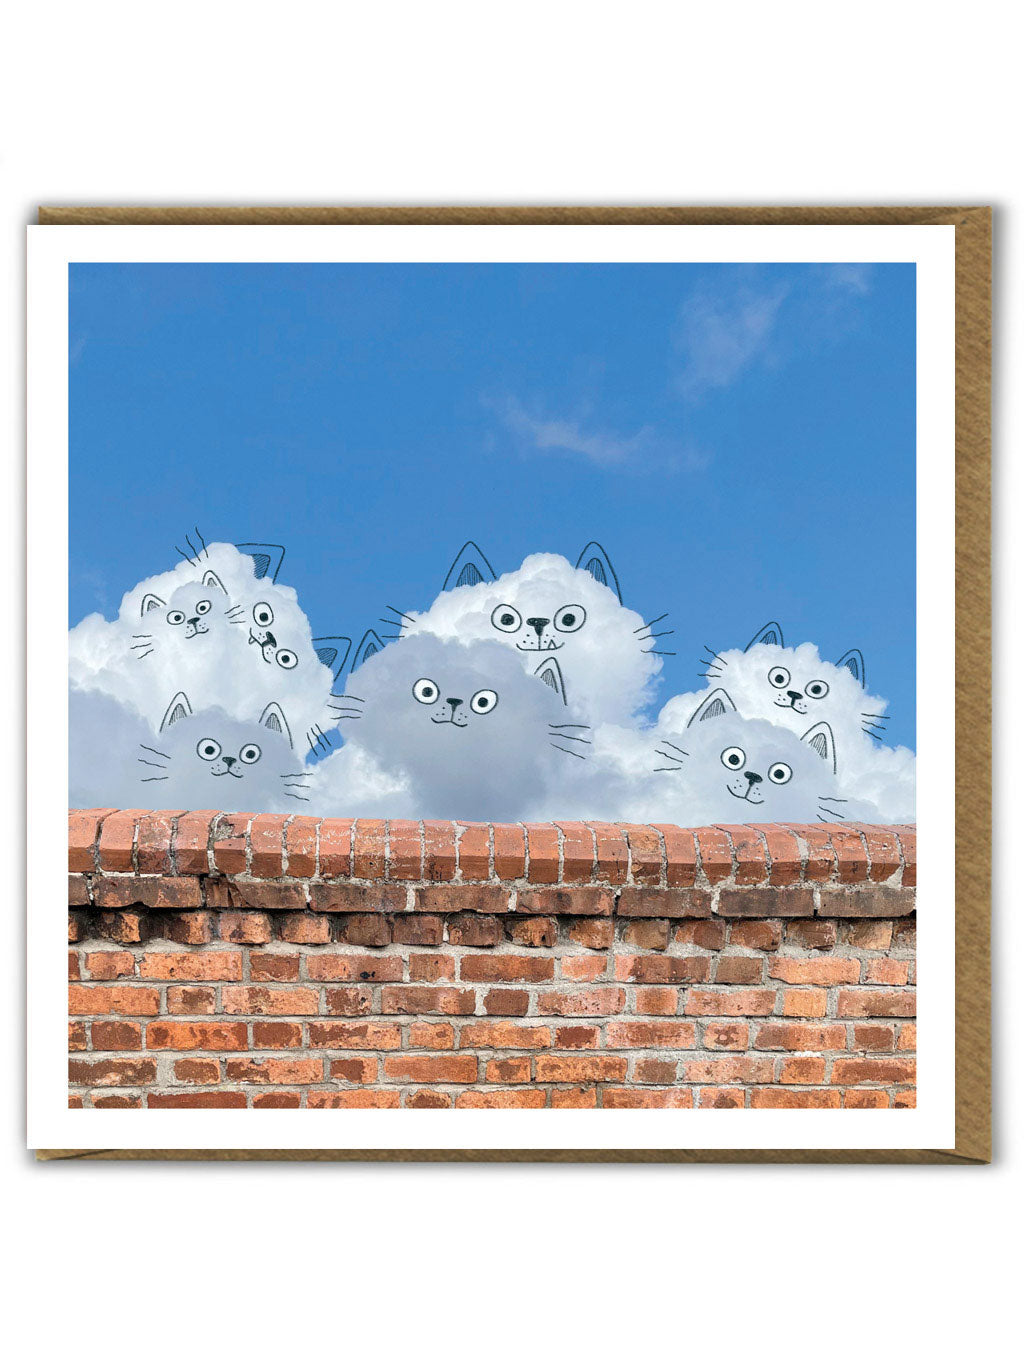 A greetings card showing a cloudy sky where the clouds have been made to look like lots of cats peering over a brick wall using a black pen.